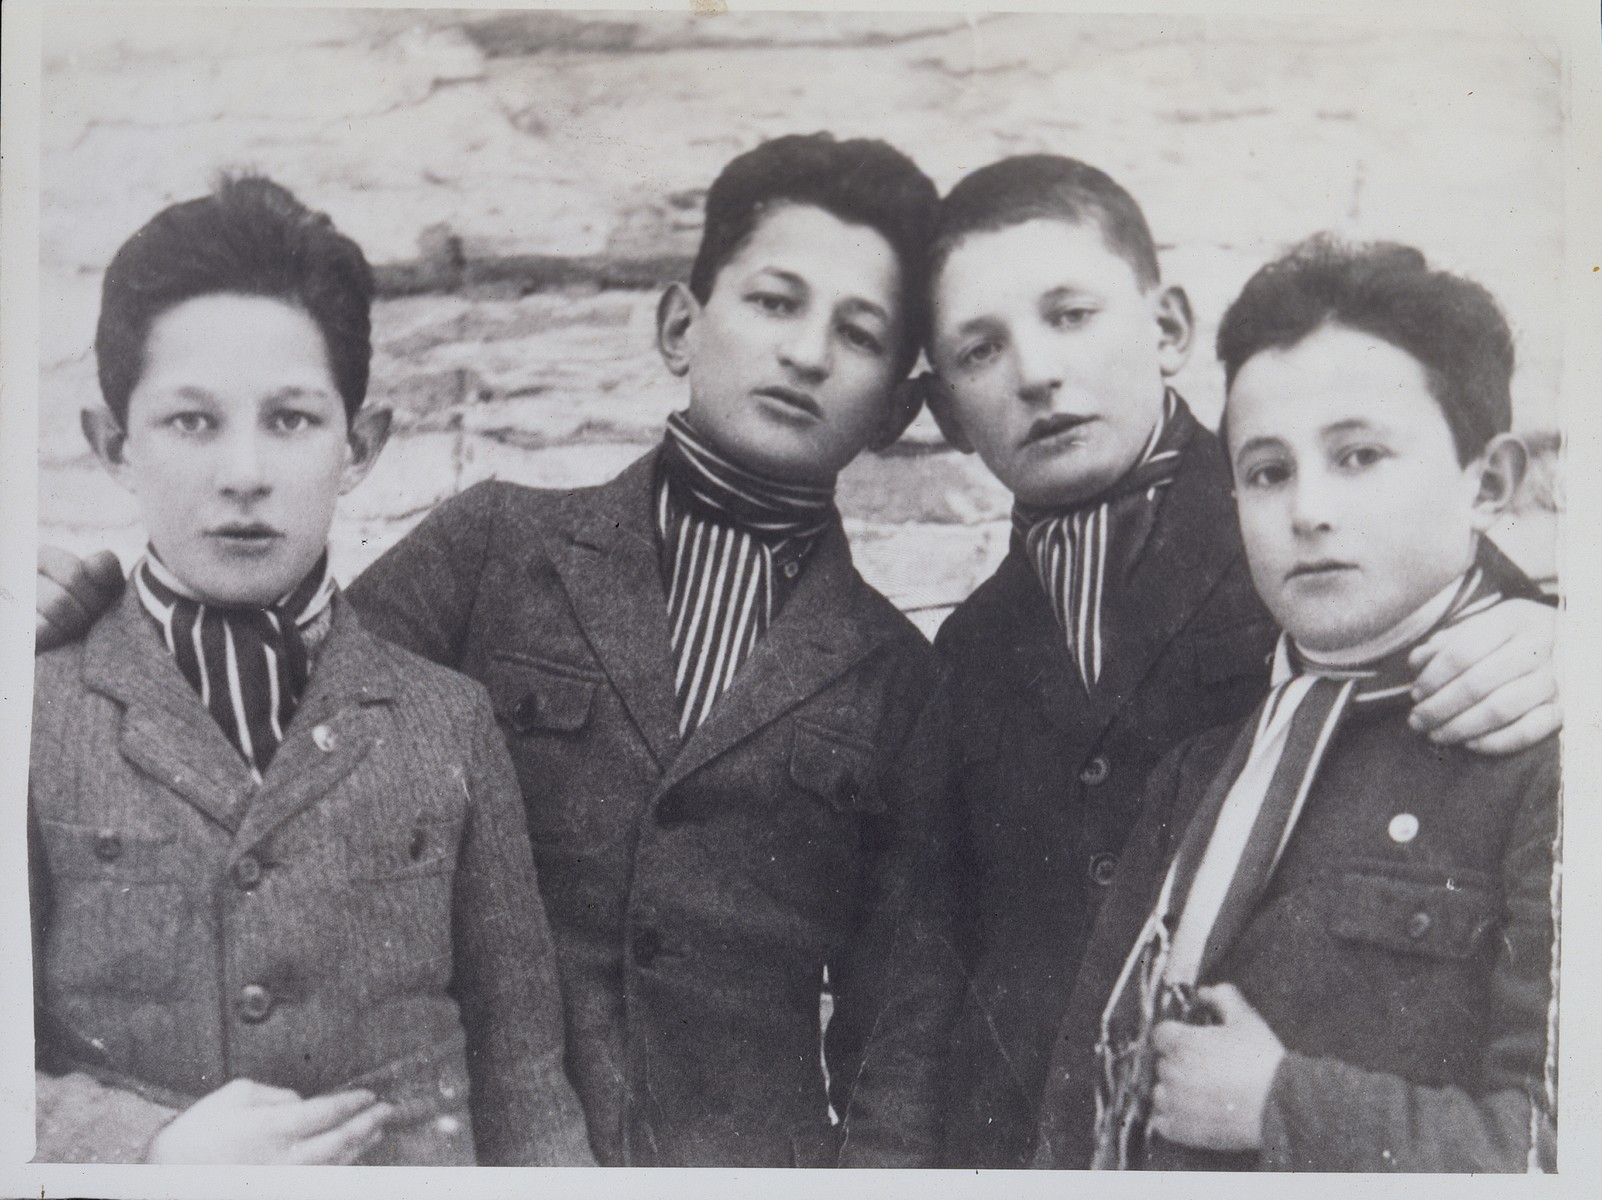 Four Jewish teenage boys from Eisiskes pose wearing striped cravats, indicating they were members of the soccer team.

Pictured from right to left are: Velvke Saltz, Motke Kiuchefski, Leibke Sonenson and Israel Szczuczynski.  Velvke Saltzs immigrated to the United States in 1923; Motke Kiuchefski fled to the Soviet Union; Leibke Sonenson was killed by the Germans in the September 1941 mass shooting action in Eisiskes; and Israel Szczuczynski was killed by members of the Polish Home Army.